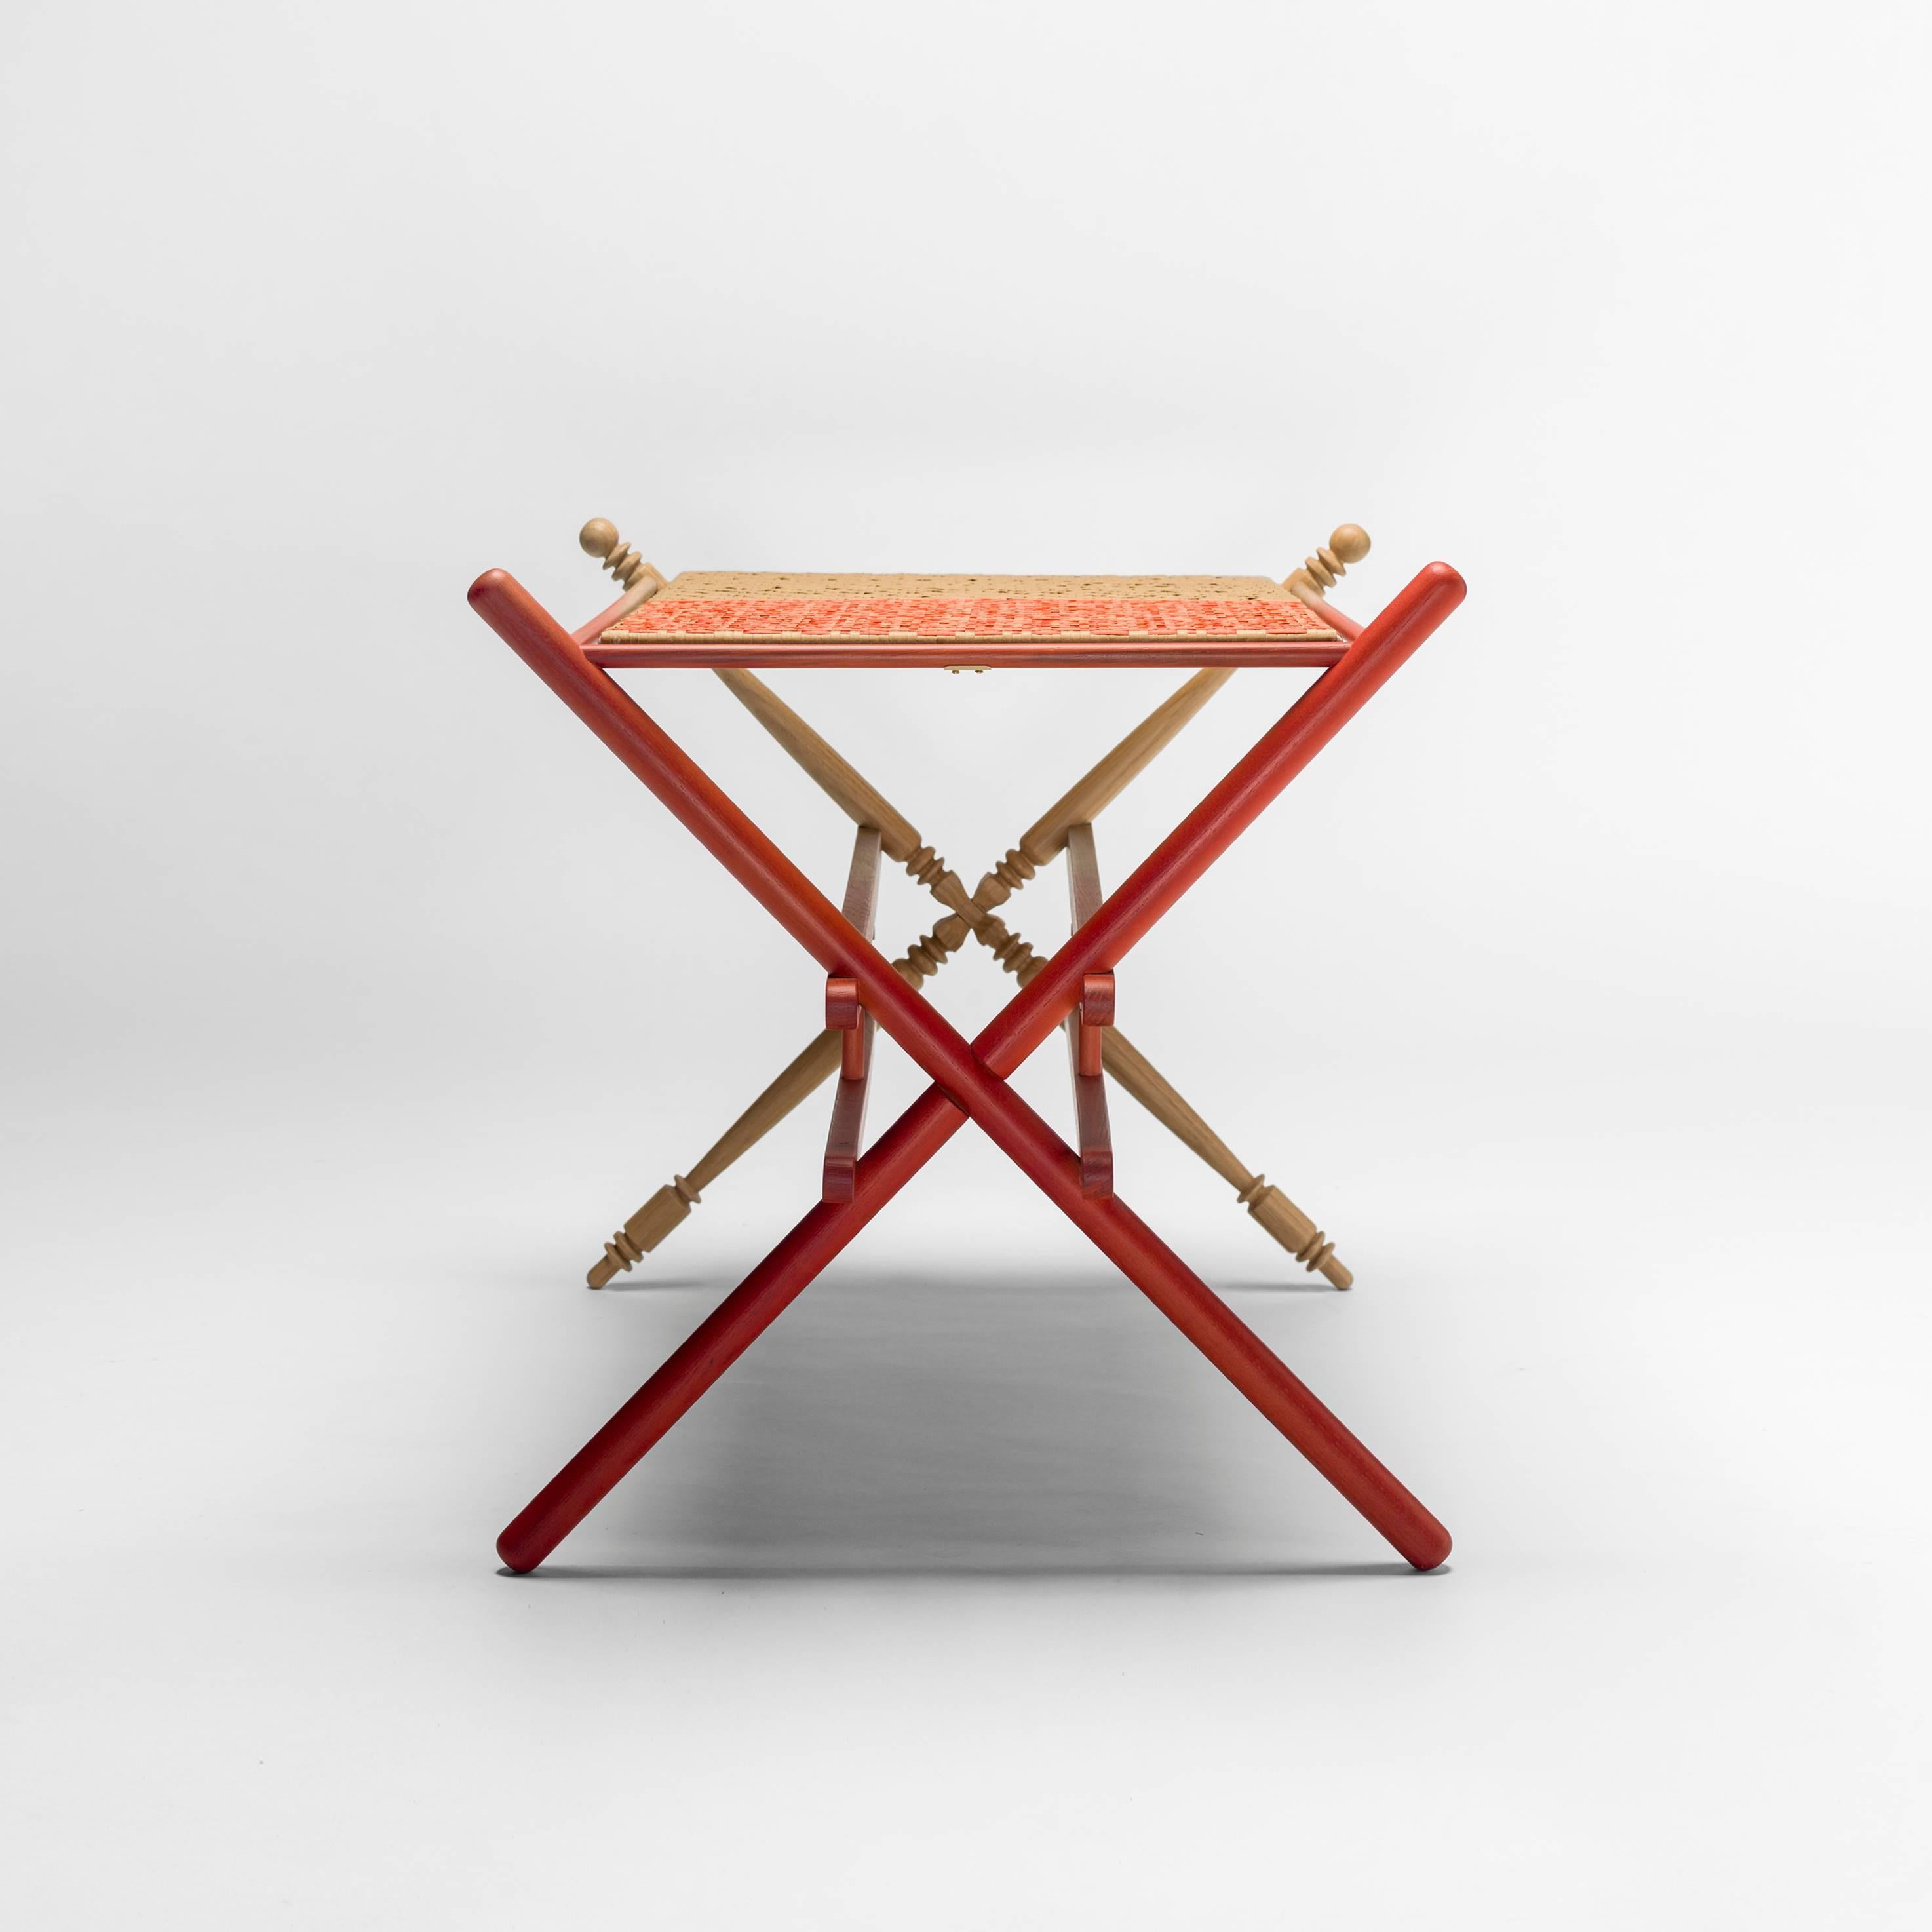 Modern Limited Edition Taola Table by Gazzaz Brothers